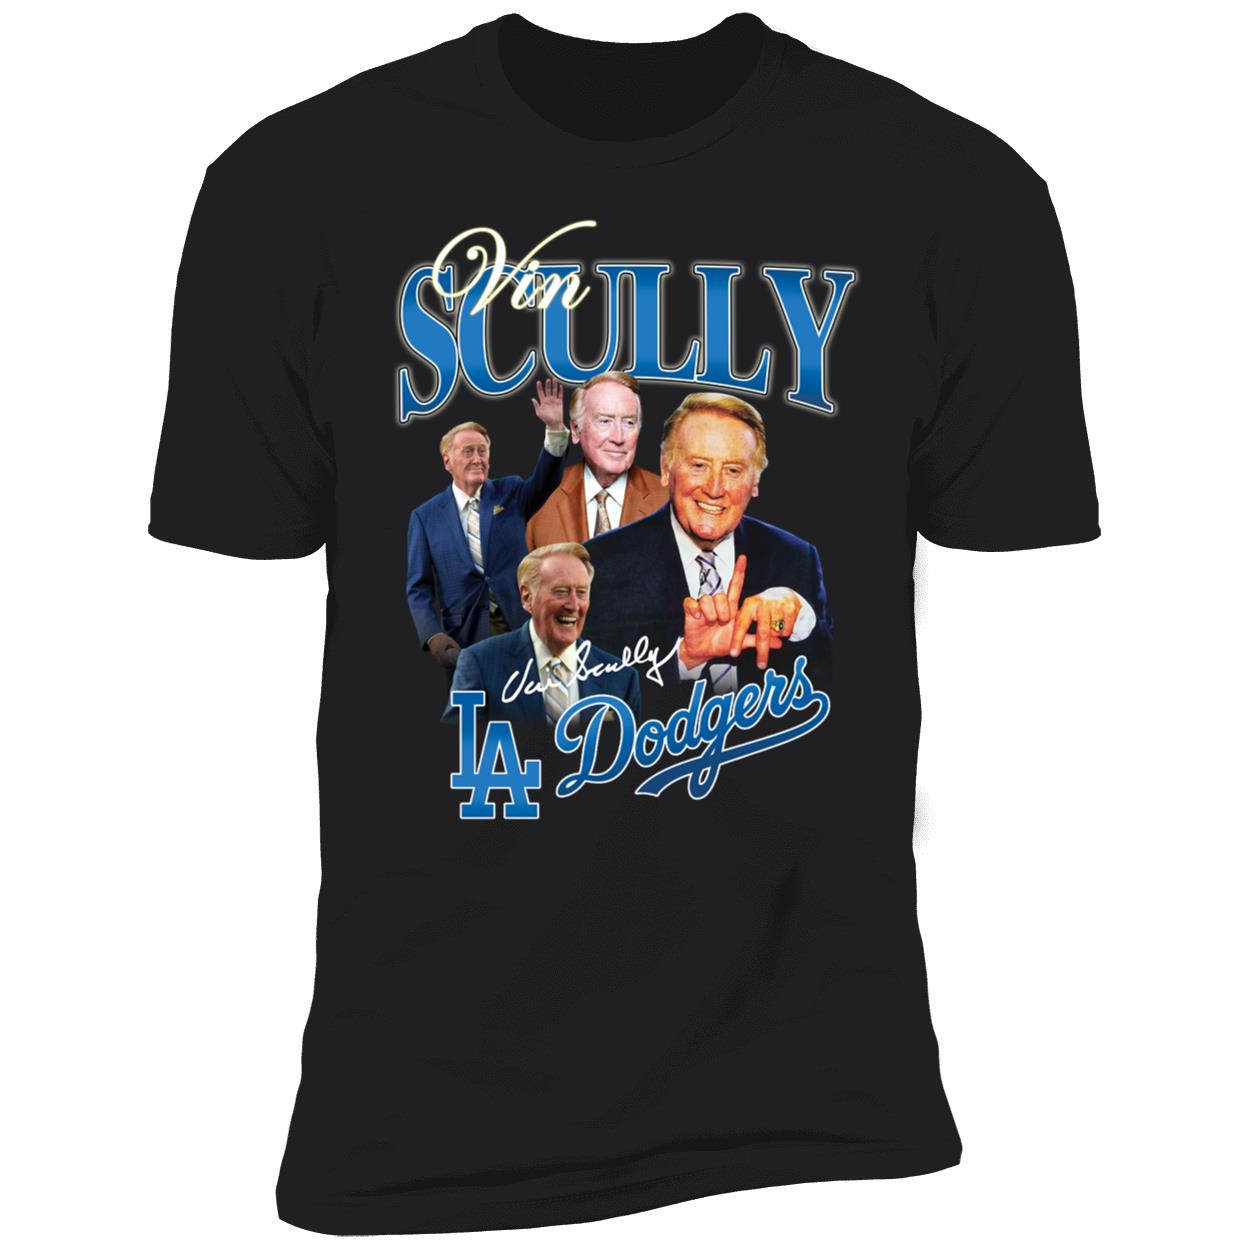 Los Angeles Dodger Vin Scully t shirt